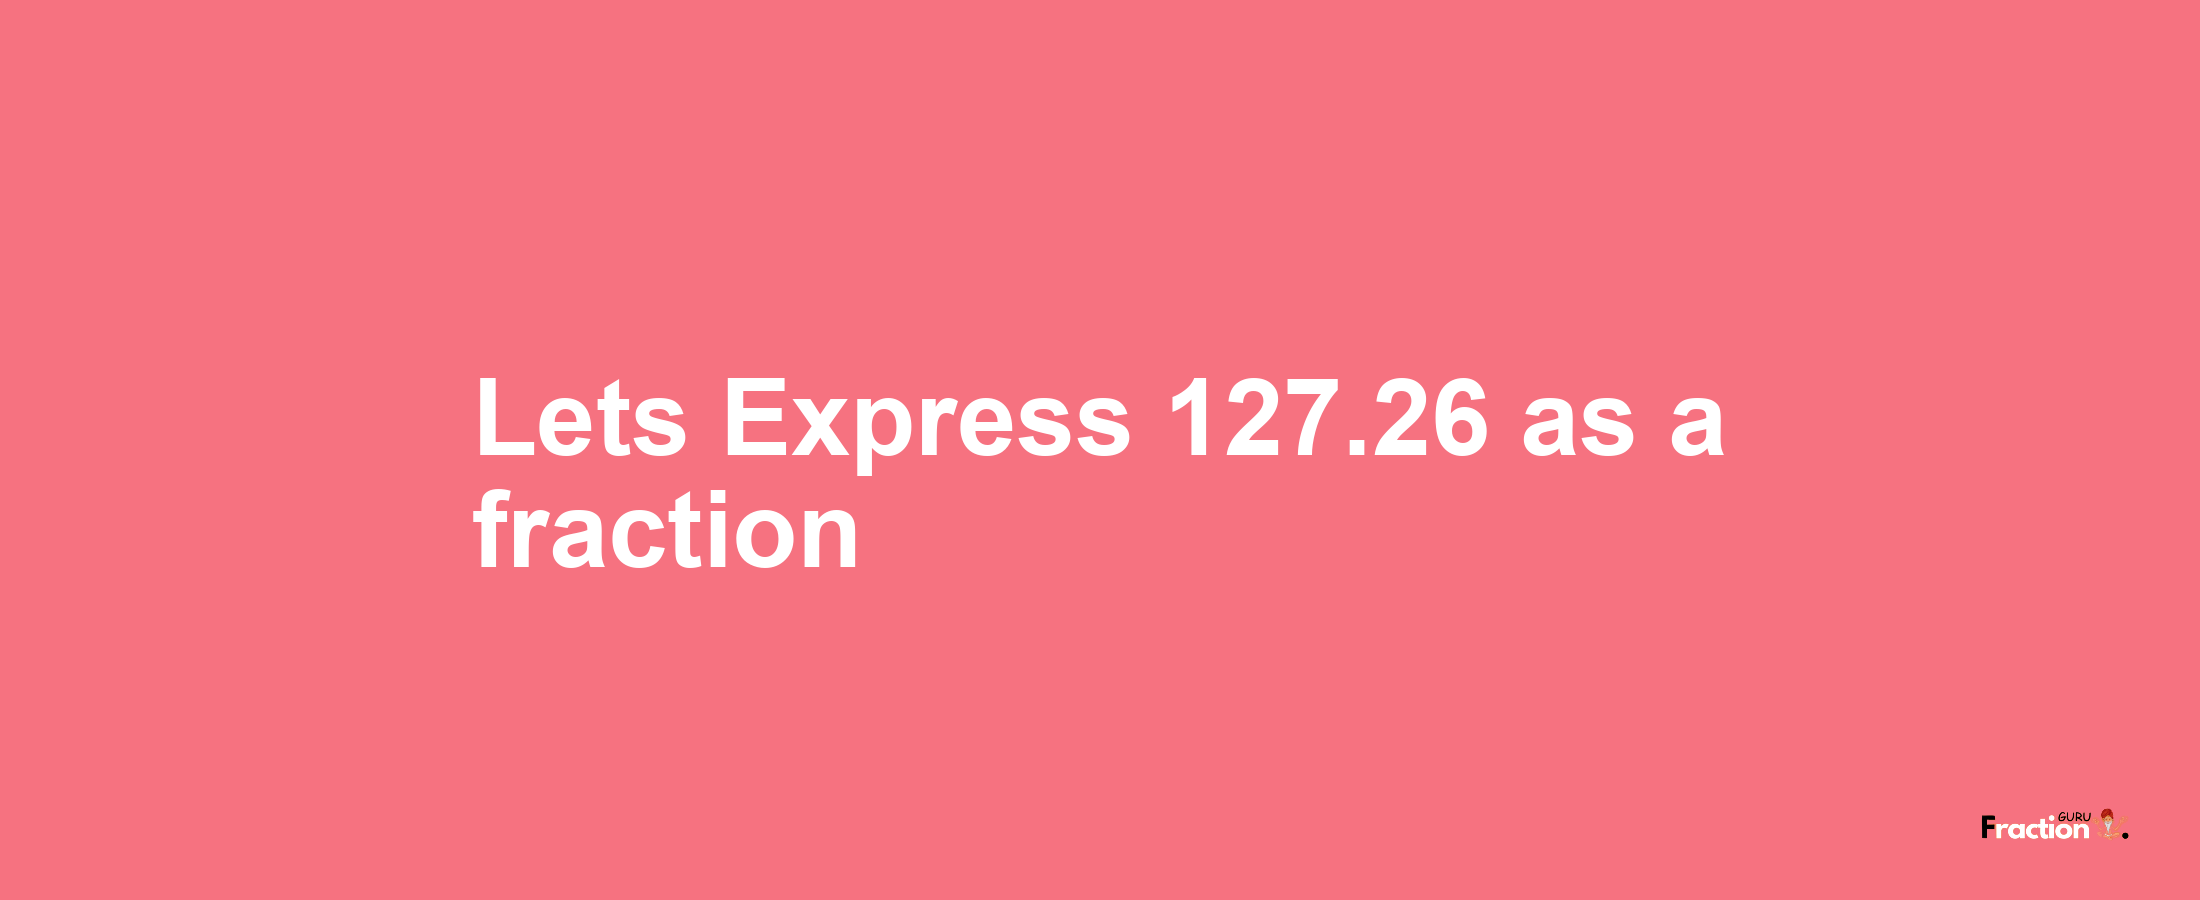 Lets Express 127.26 as afraction